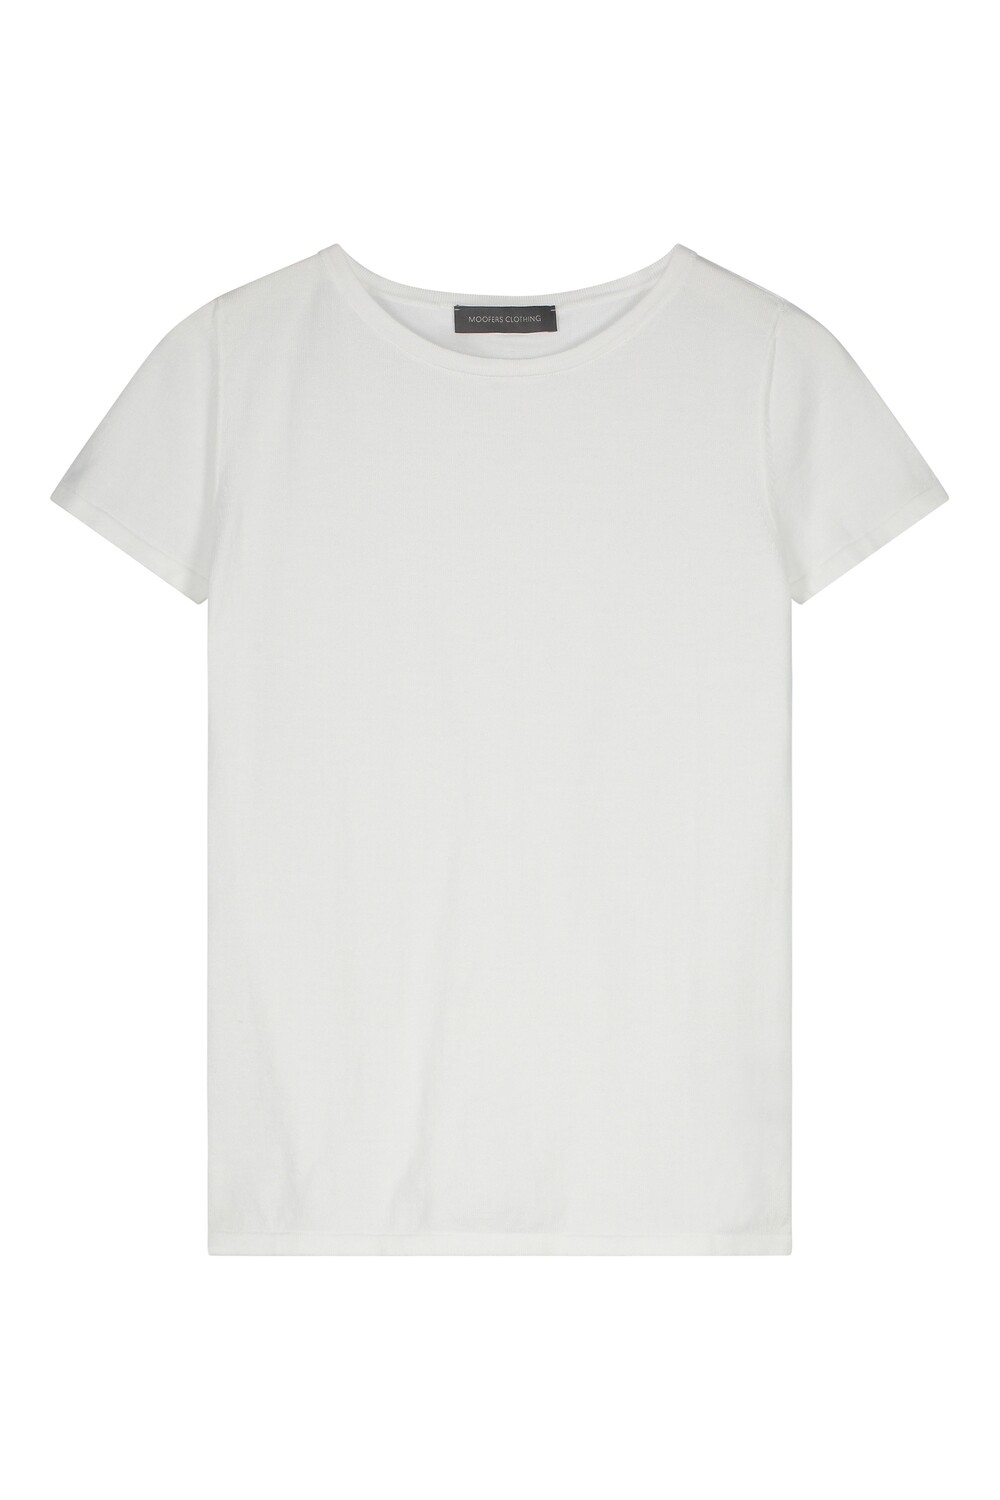 KNITTED T-SHIRT SHORT SLEEVE ORGANIC COTTON IN WHITE